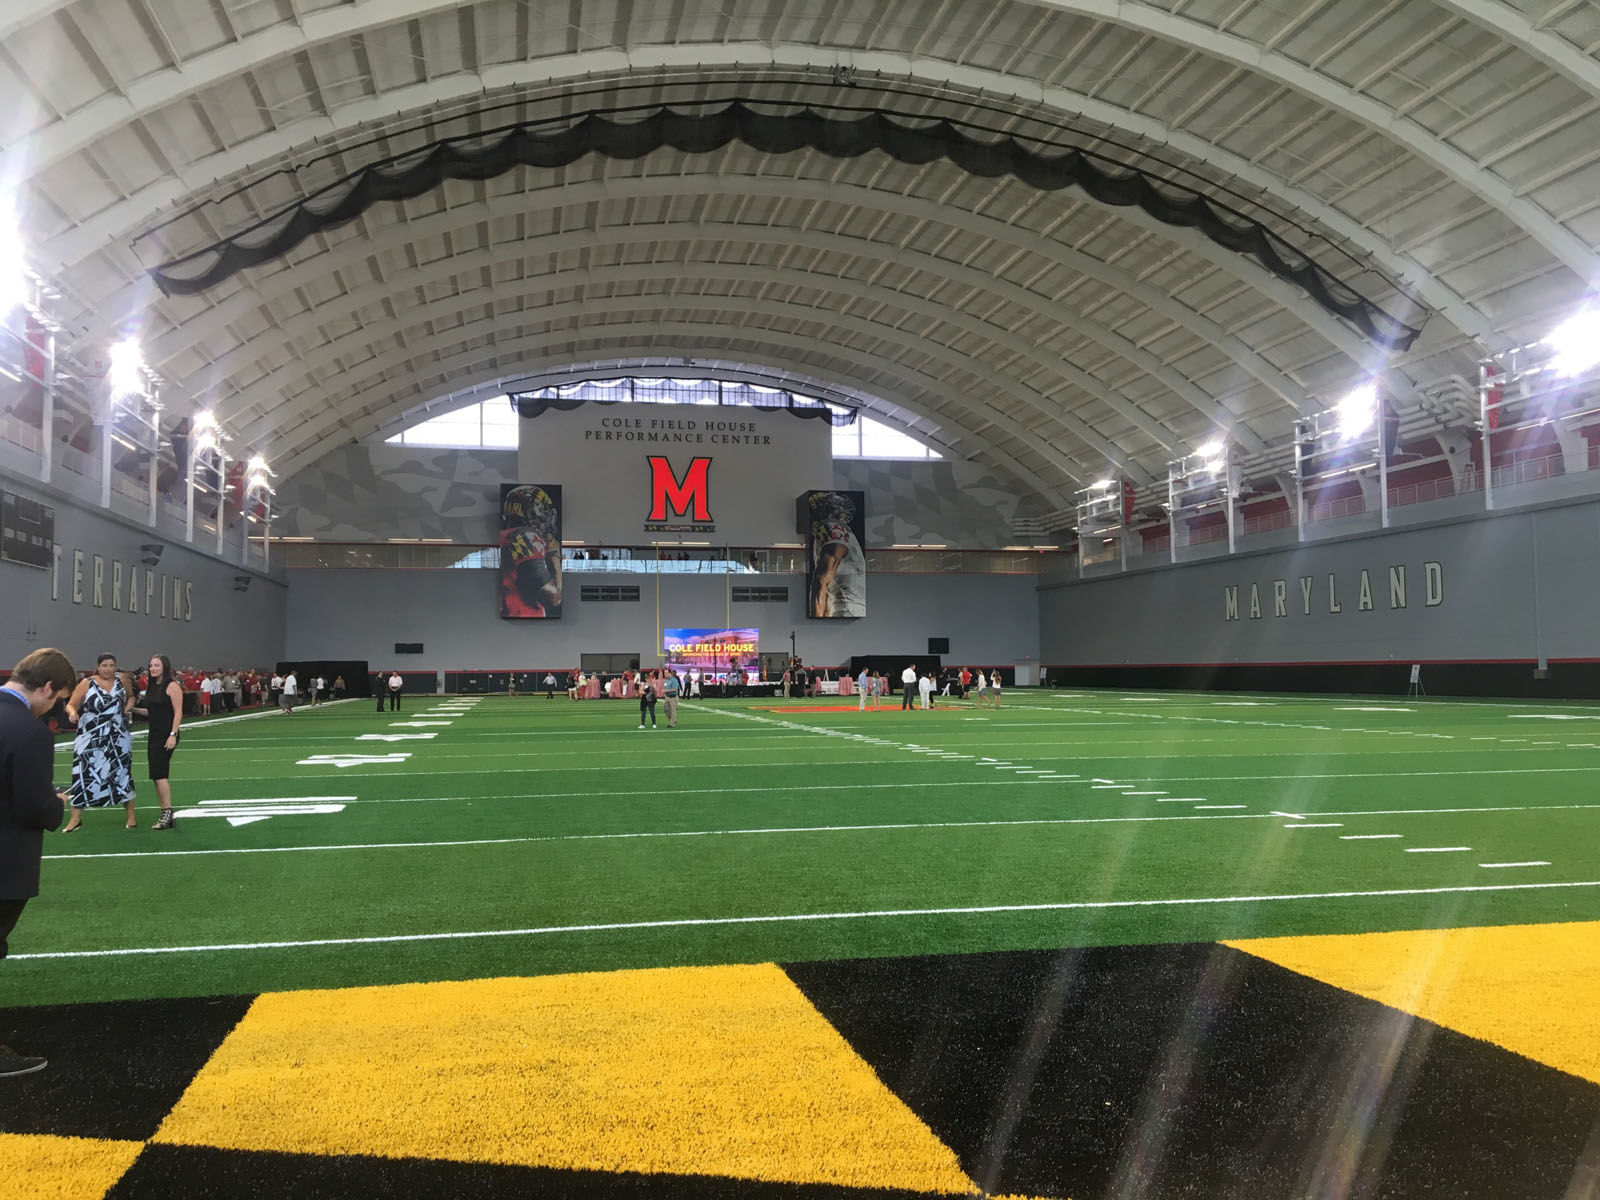 "It's a game cahnger for us with our team, with the development, with what we'll be able to do on a day-to-day basis here," said Terrapins football coach DJ Durkin in regards to the new practice facility at Cole Field House. (WTOP/Max Smith)